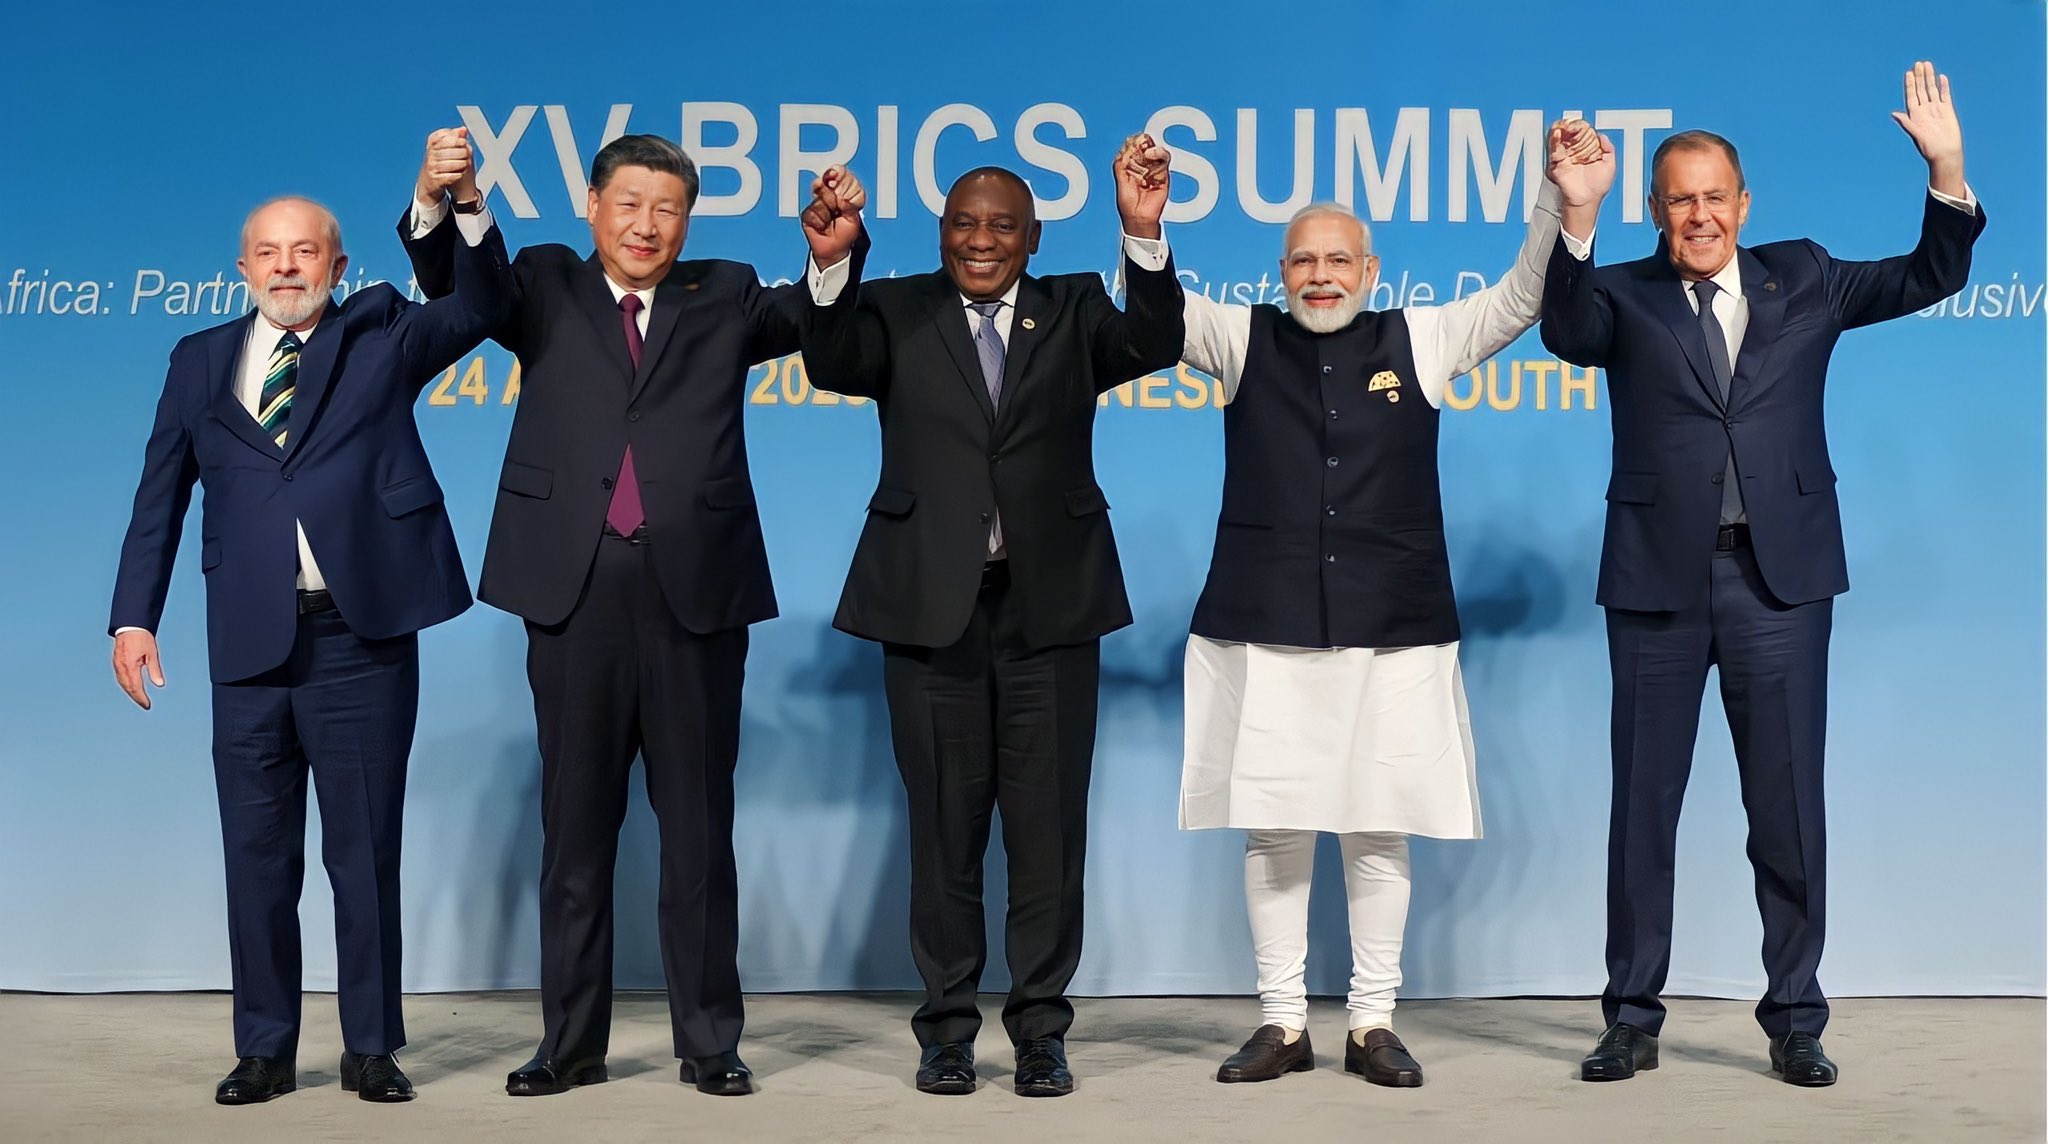 Will an expanded BRICS overshadow the US in the Middle East?